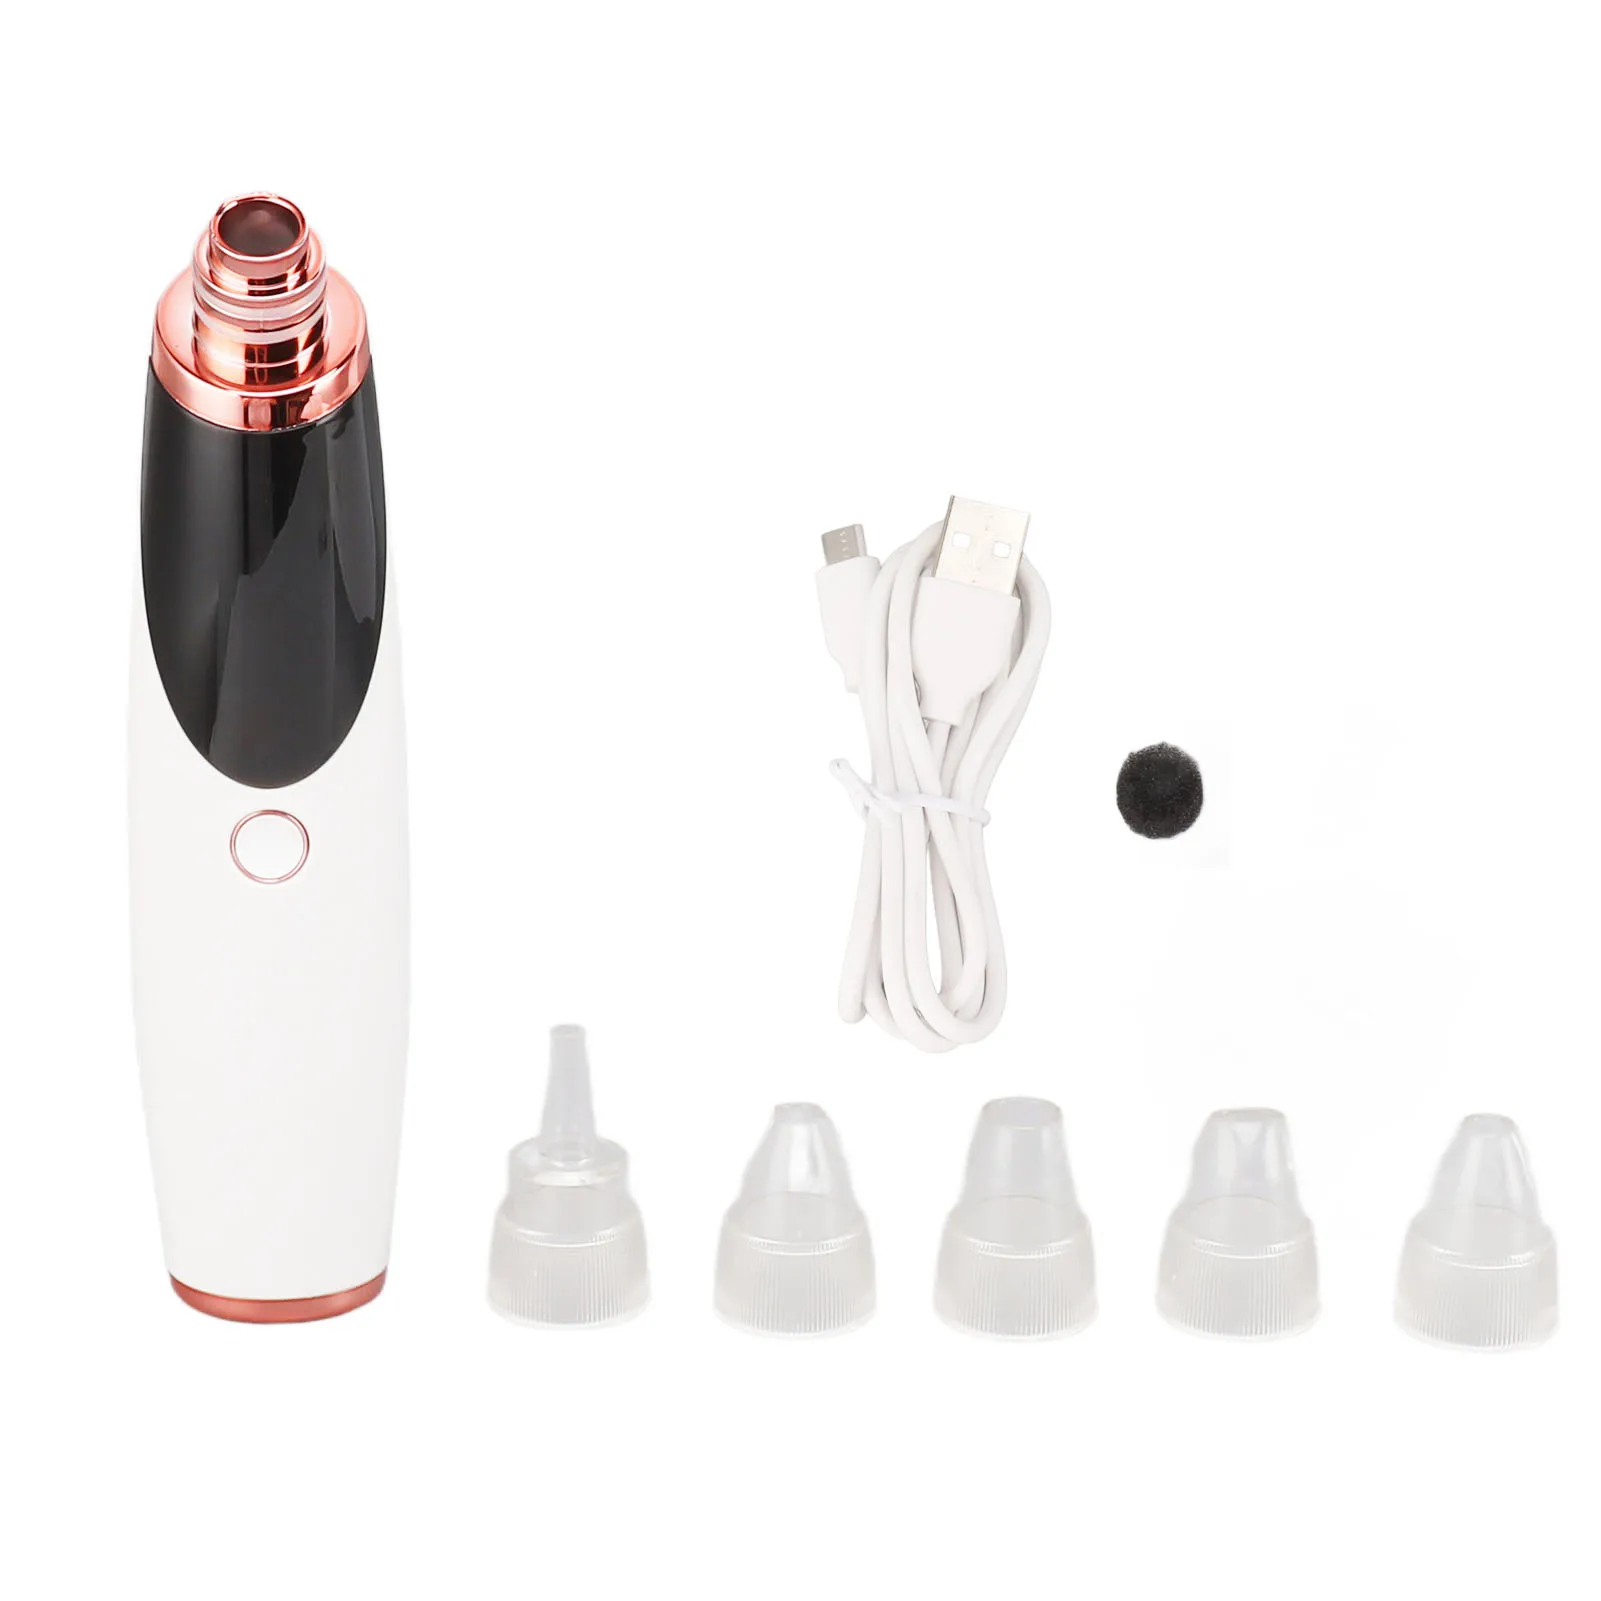 

Facial Pore Cleaner Deep Cleansing Reduce Pimples Strong Suction Vacuum Blackhead Remover 5 Heads for Nose for Beauty Salon